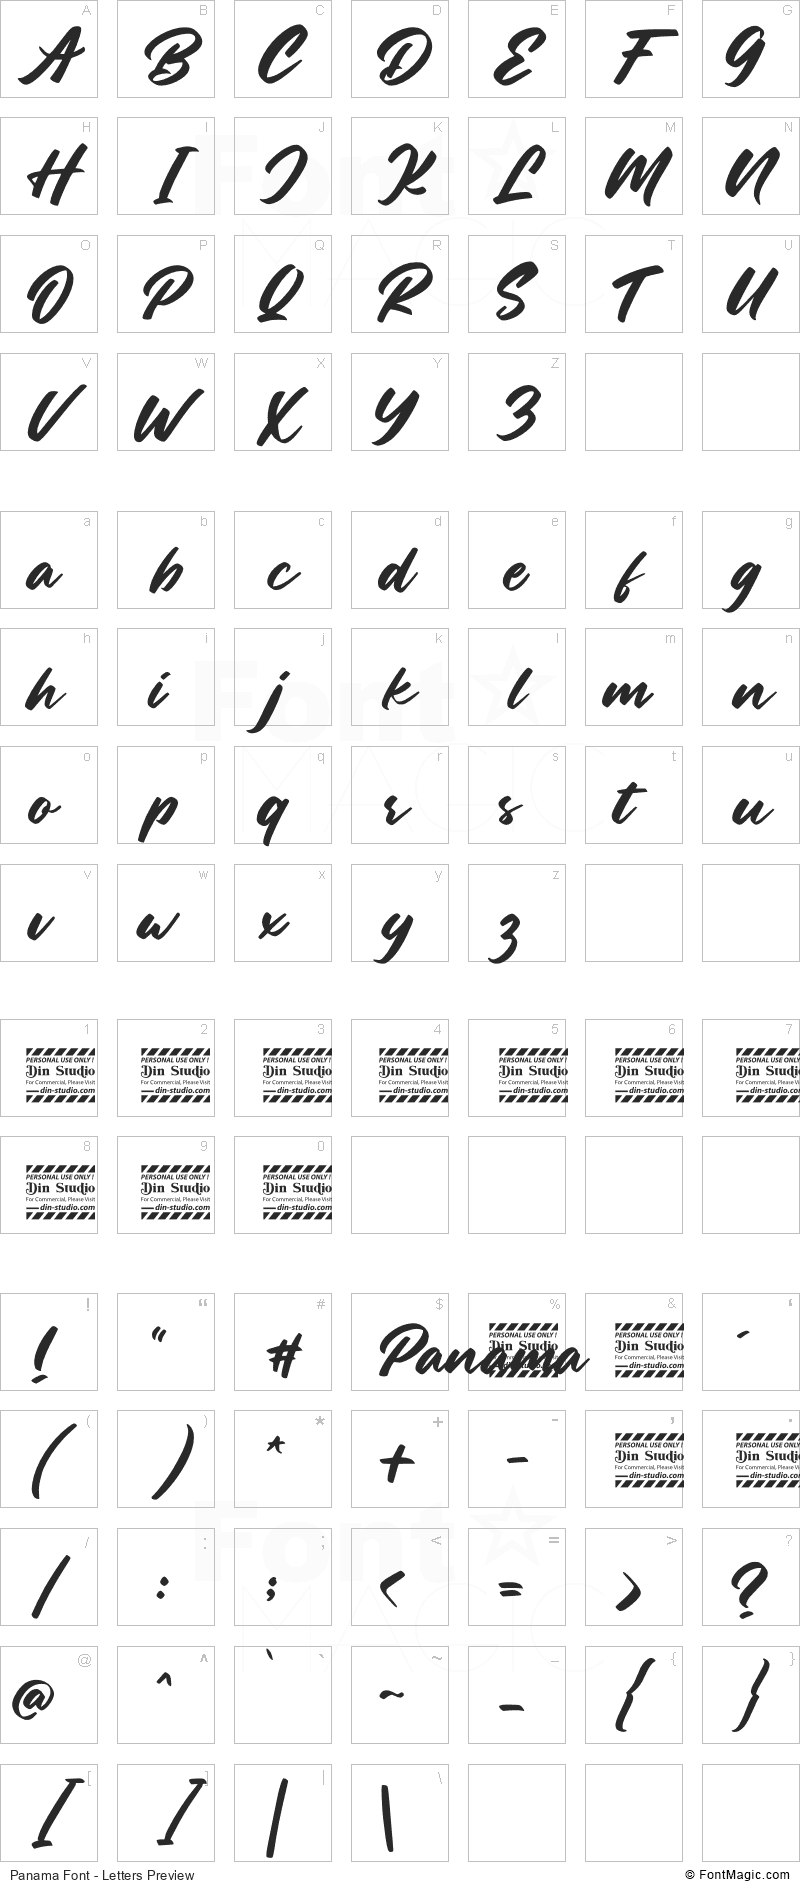 Panama Font - All Latters Preview Chart